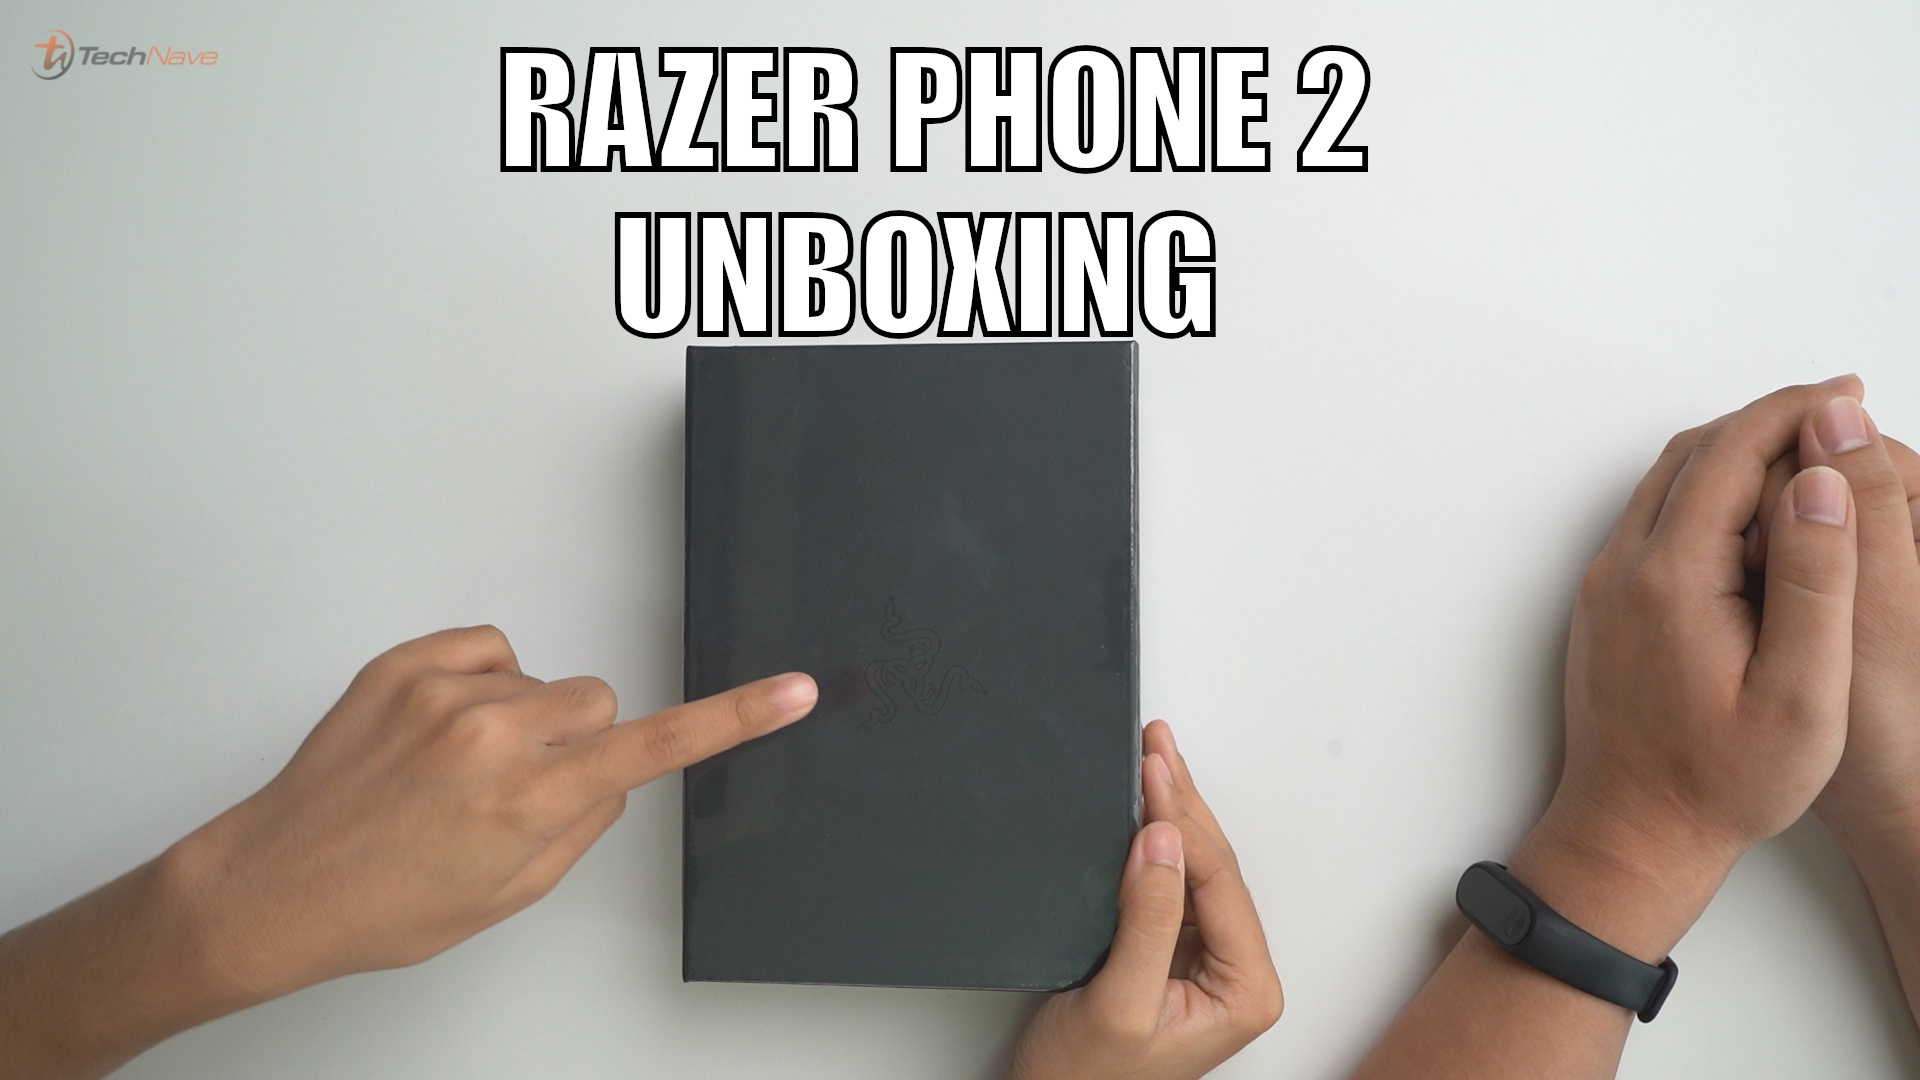 Check out the unboxing of the 120hz display Razer Phone 2